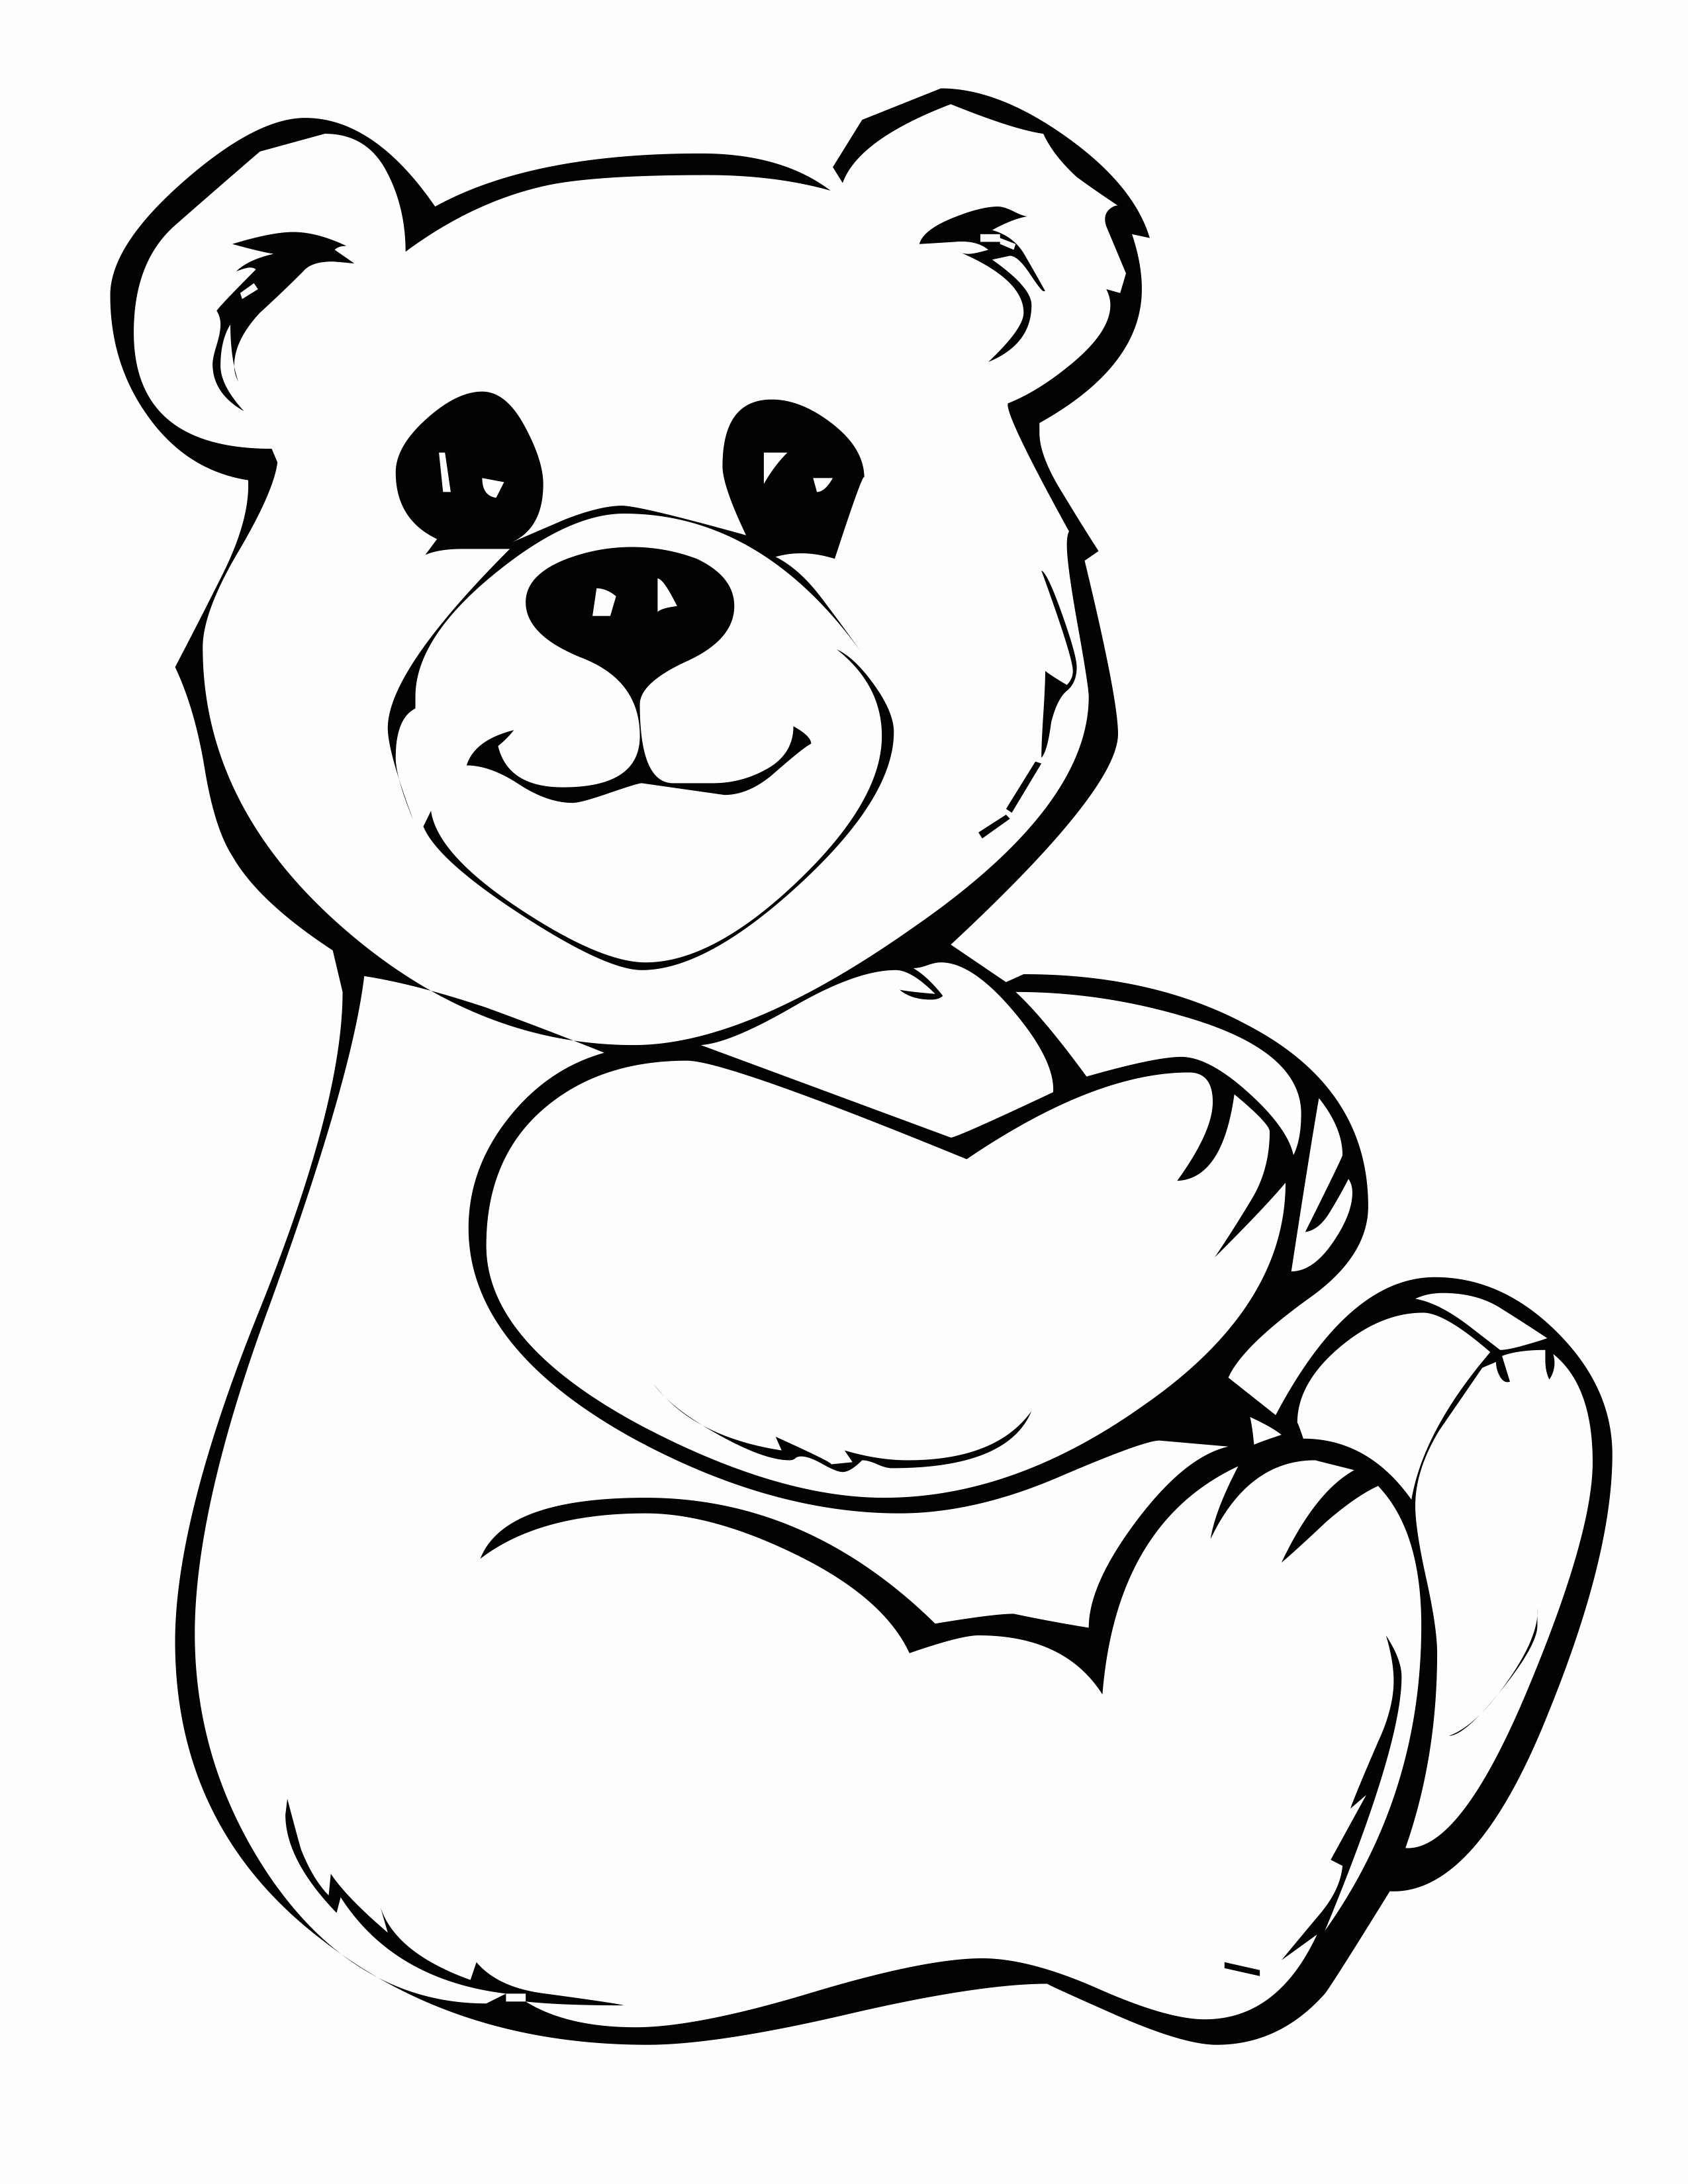 free-coloring-pages-teddy-bear-download-free-coloring-pages-teddy-bear